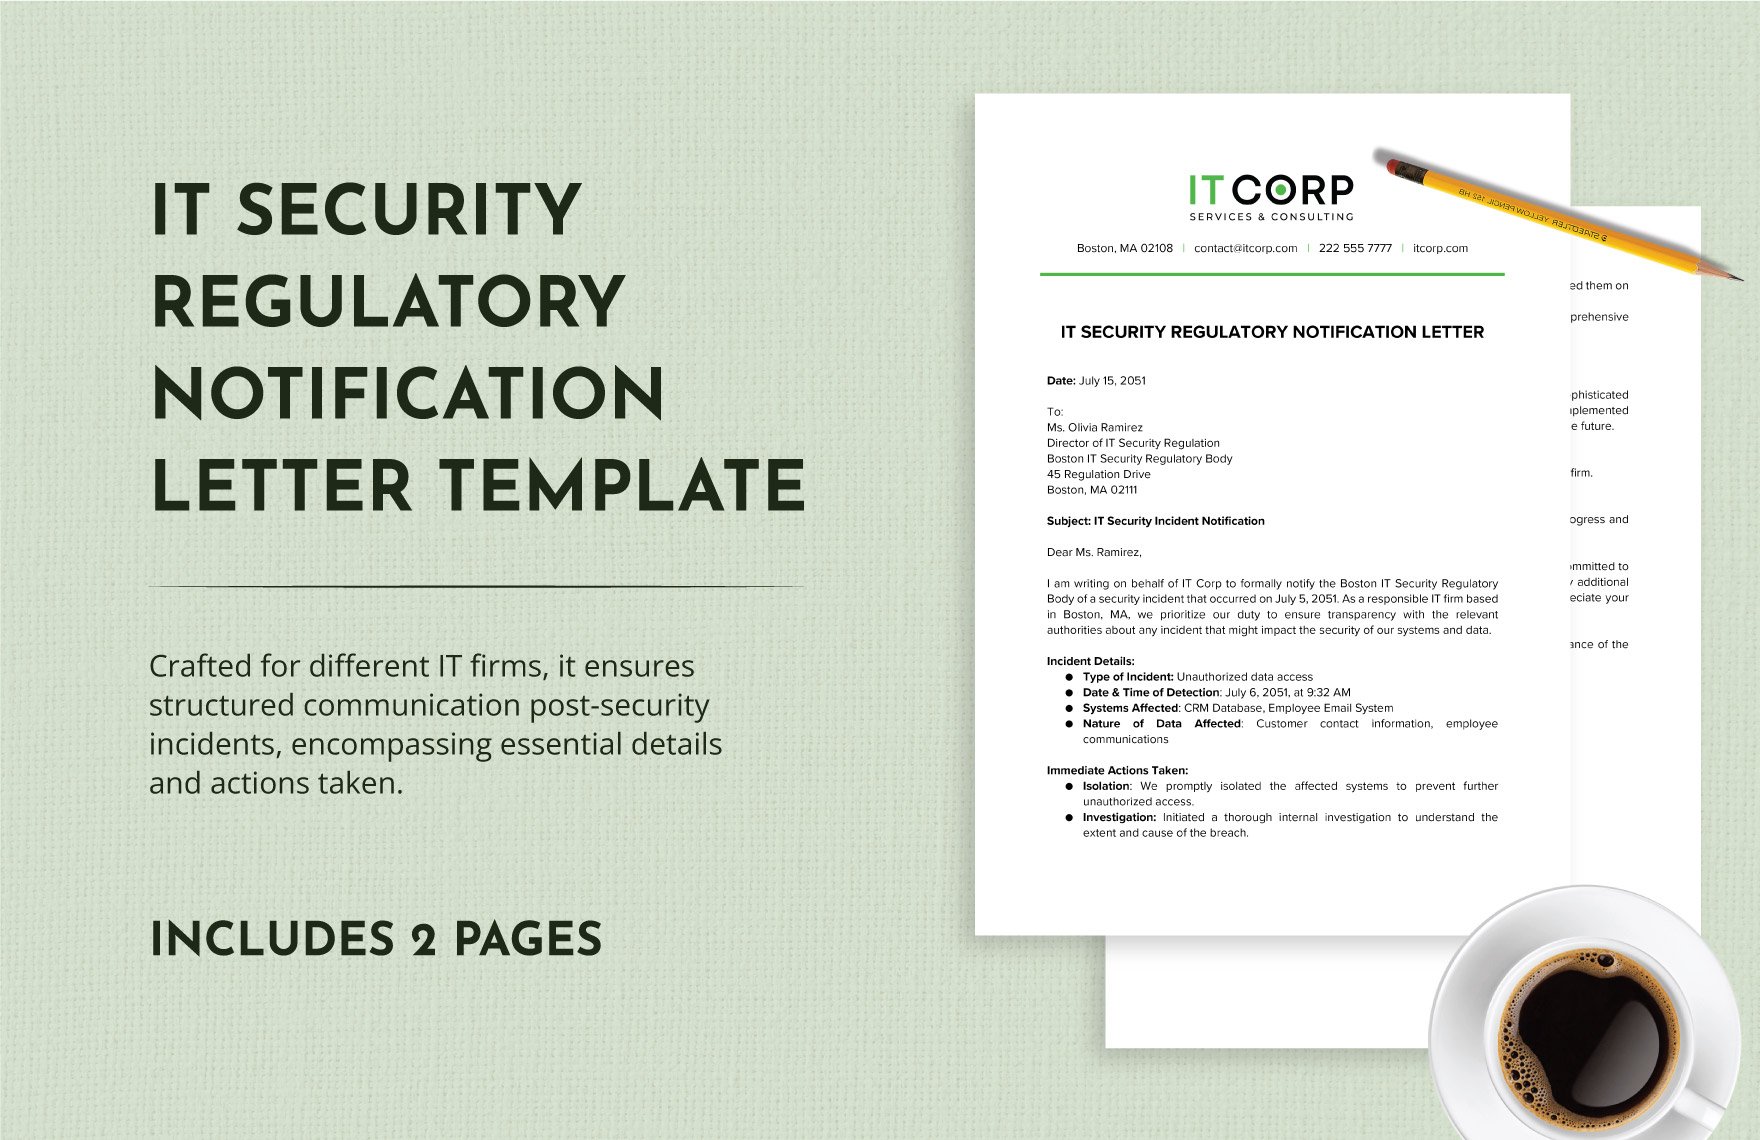 IT Security Regulatory Notification Letter Template in Word, Google Docs, PDF